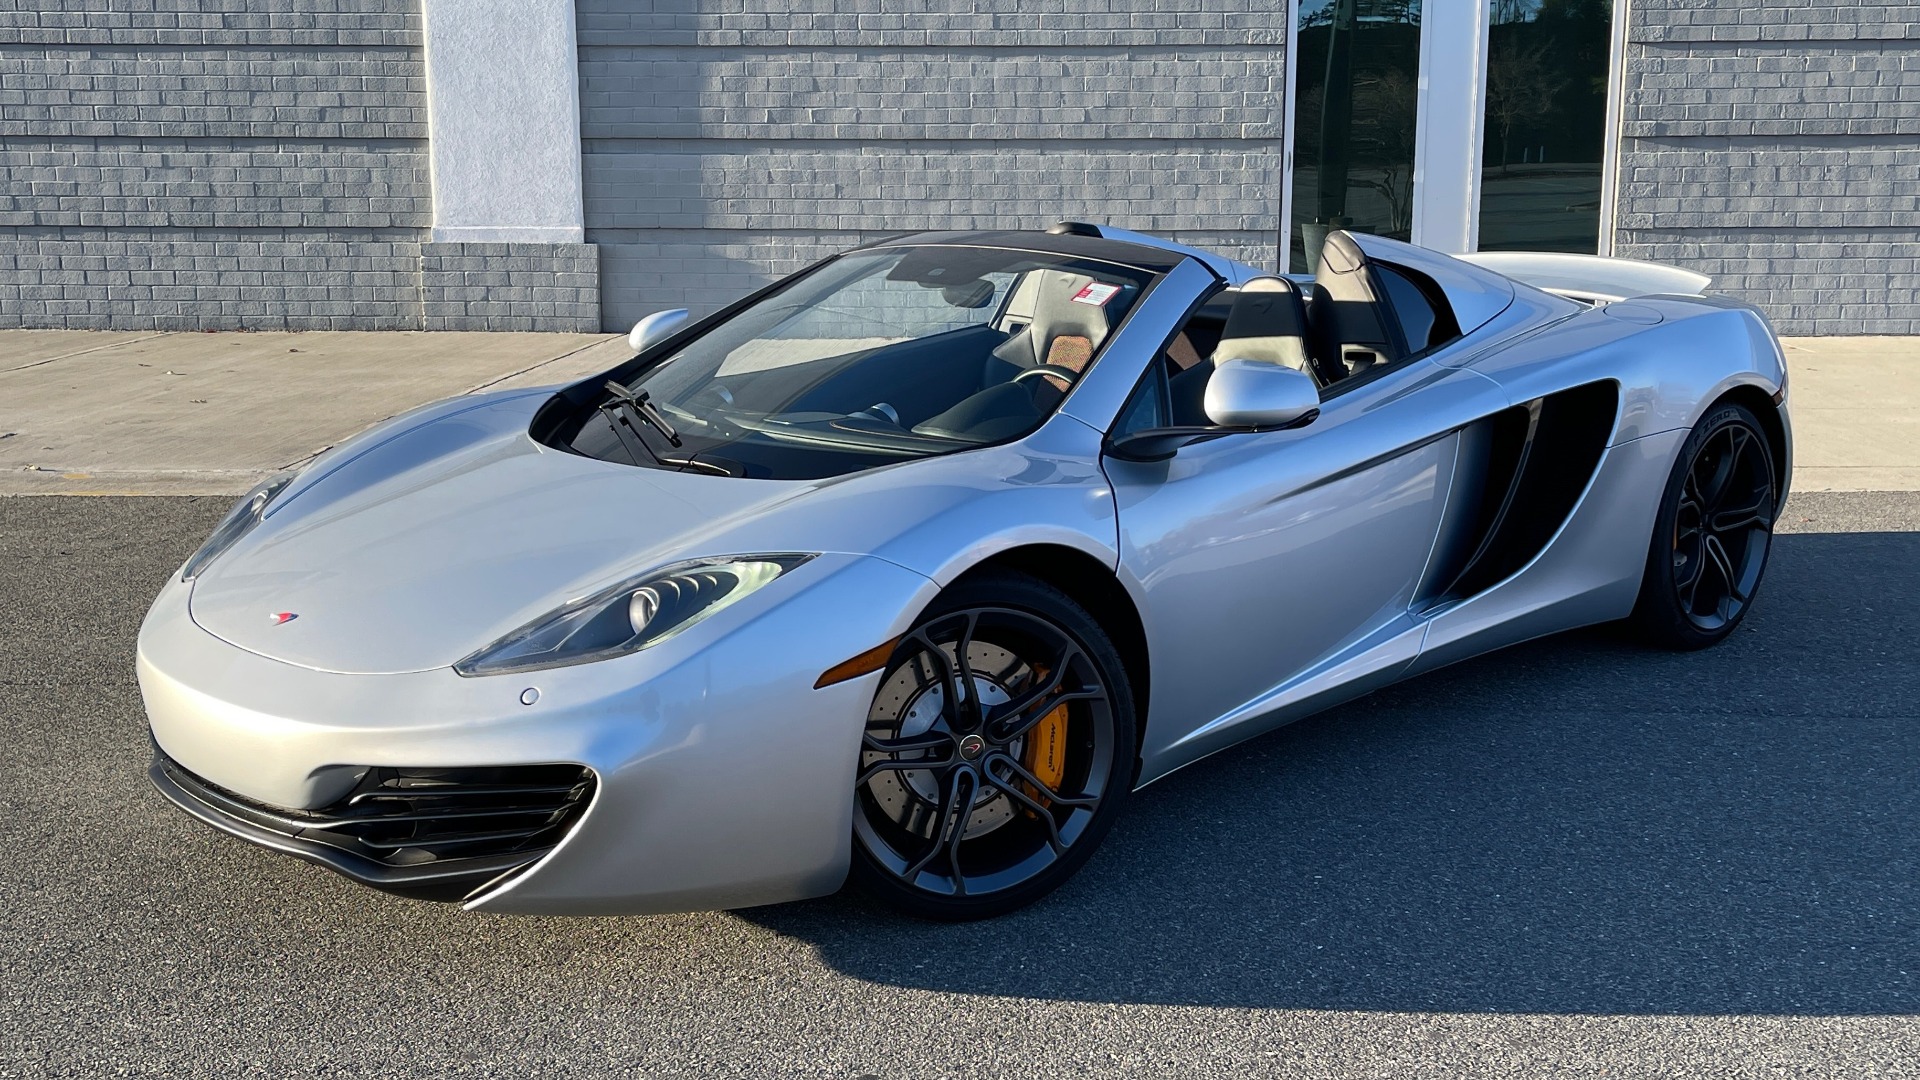 Used 2013 McLaren MP4 12C SPIDER 3.8L TURBO V8 616HP / 7AM TRANS / NAV / MERIDIAN SND for sale $145,000 at Formula Imports in Charlotte NC 28227 1